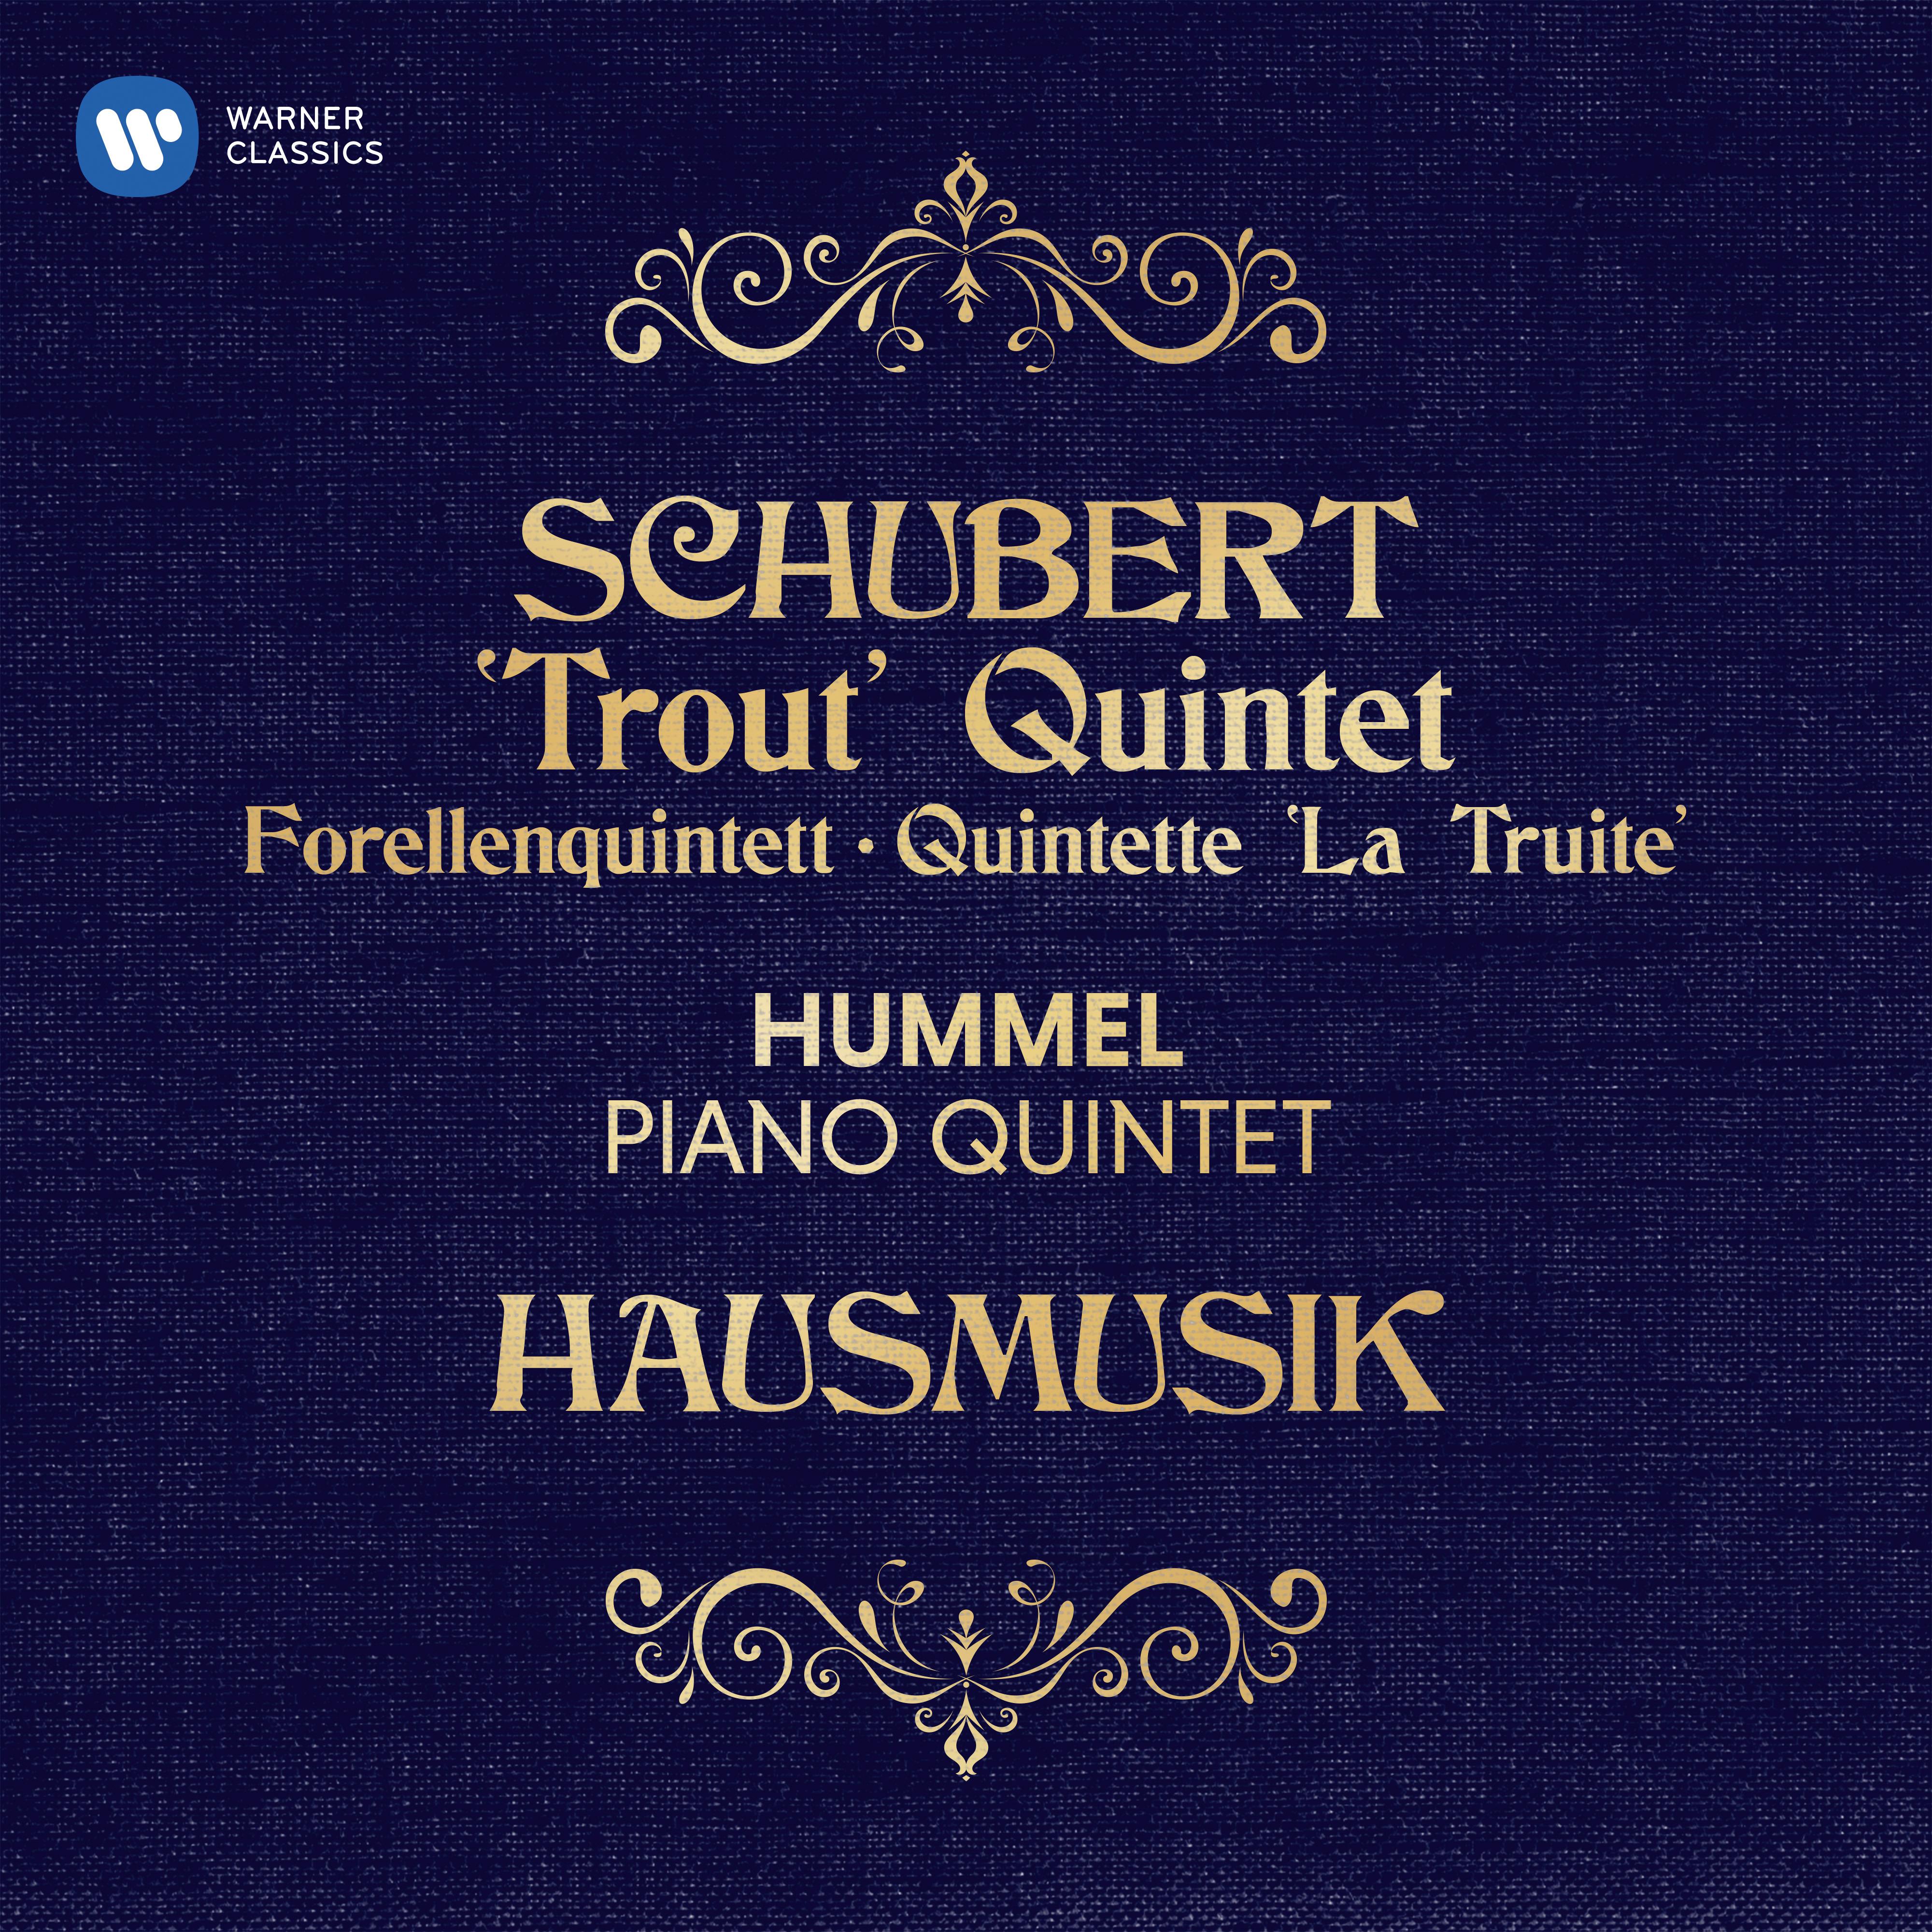 Piano Quintet in A Major, Op. Posth. 114, D. 667 "The Trout":I. Allegro vivace